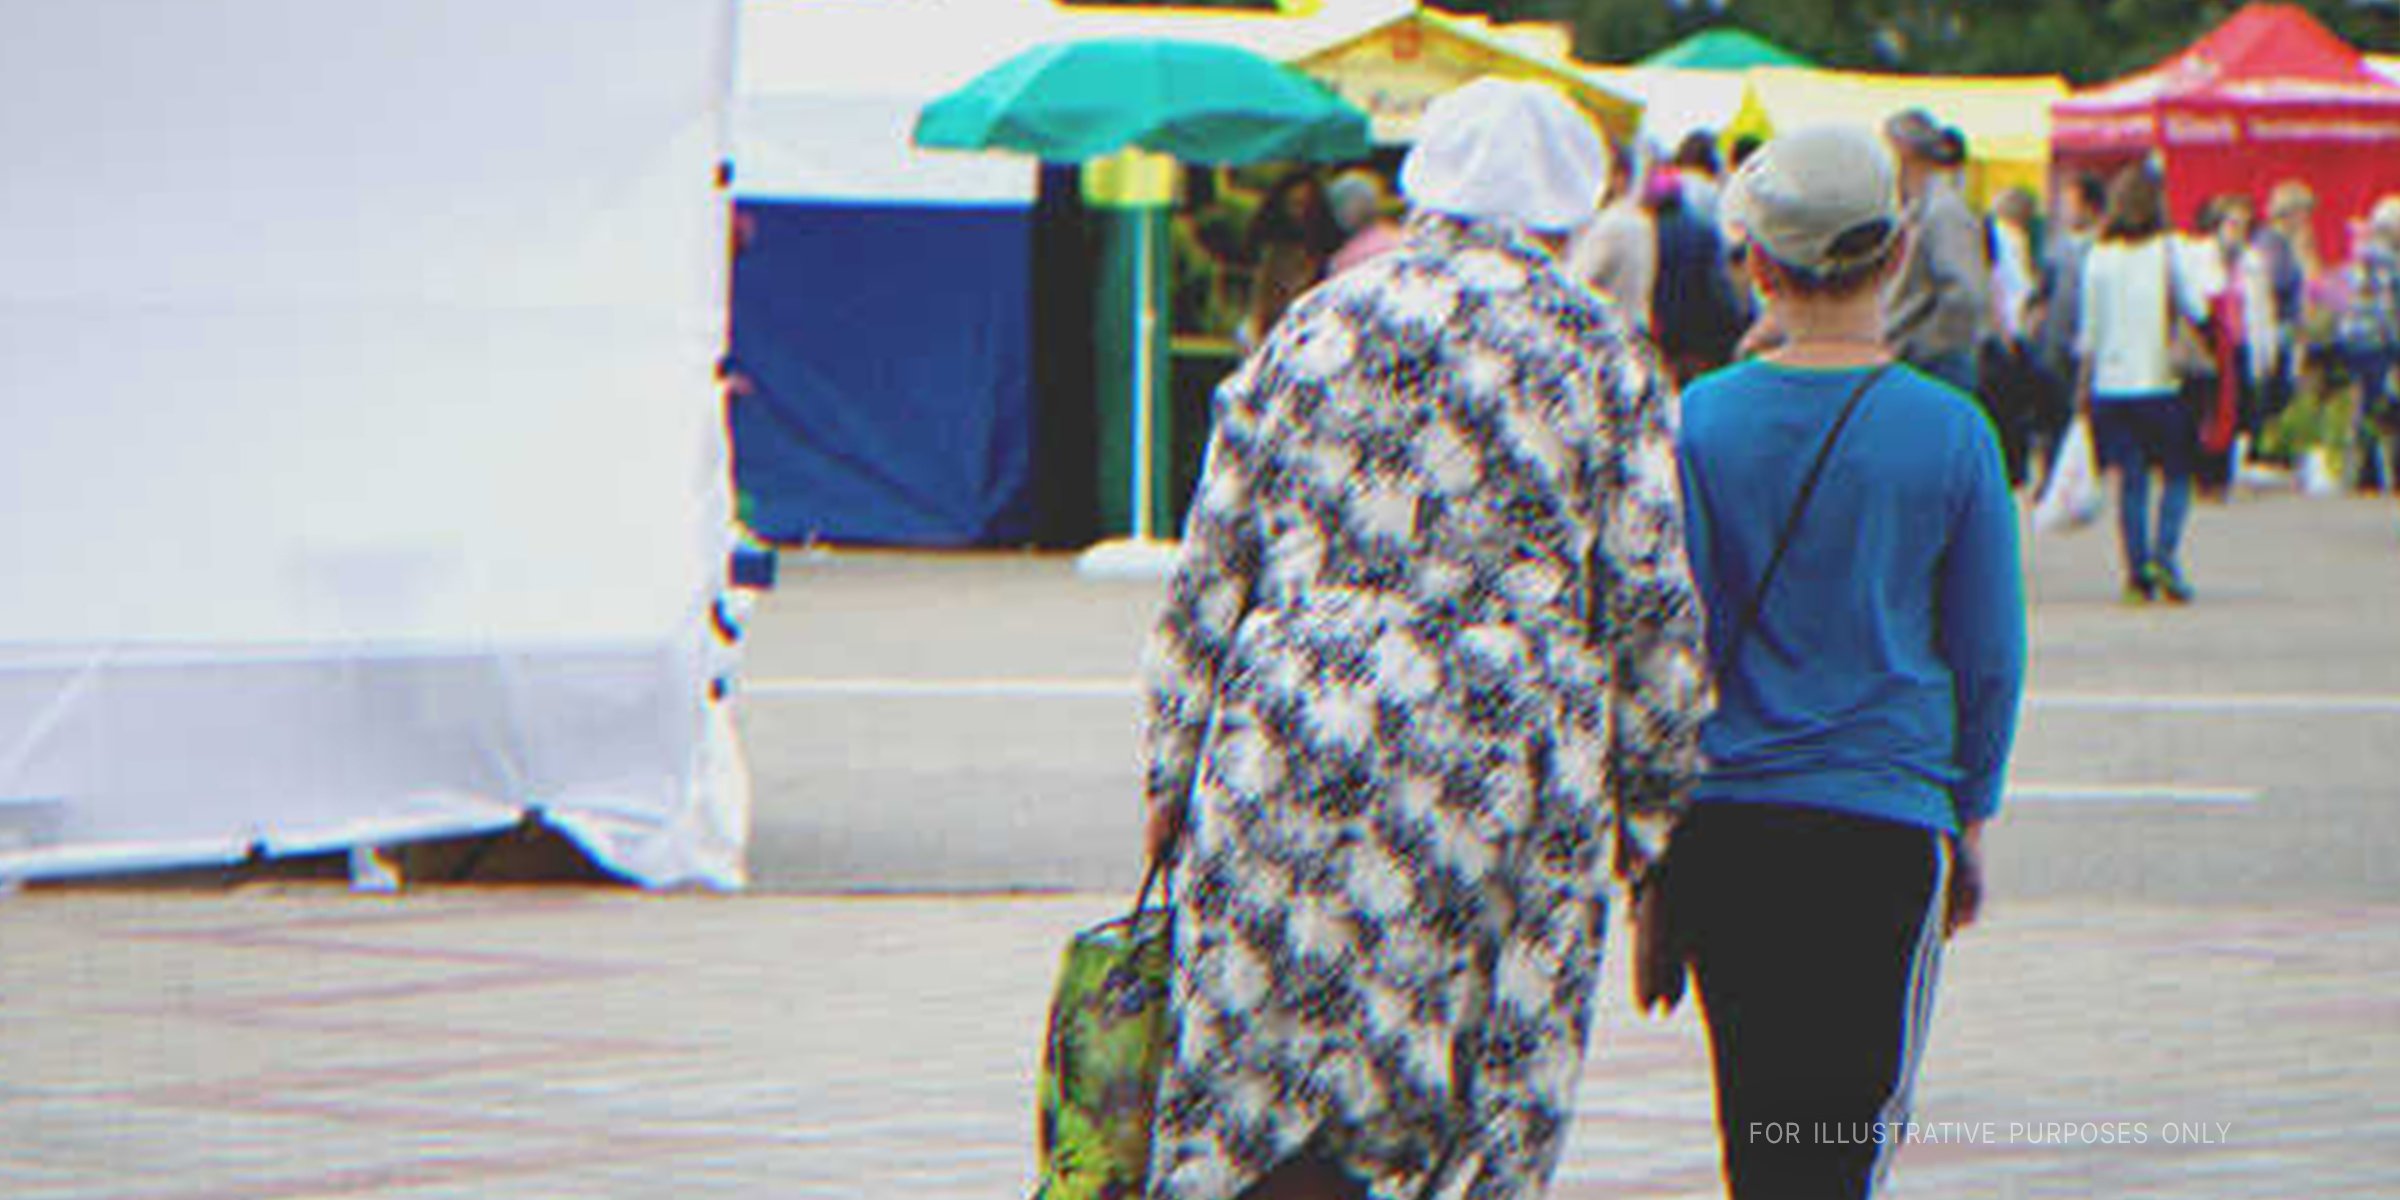 Older woman walking with young grandson | Source: Shutterstock